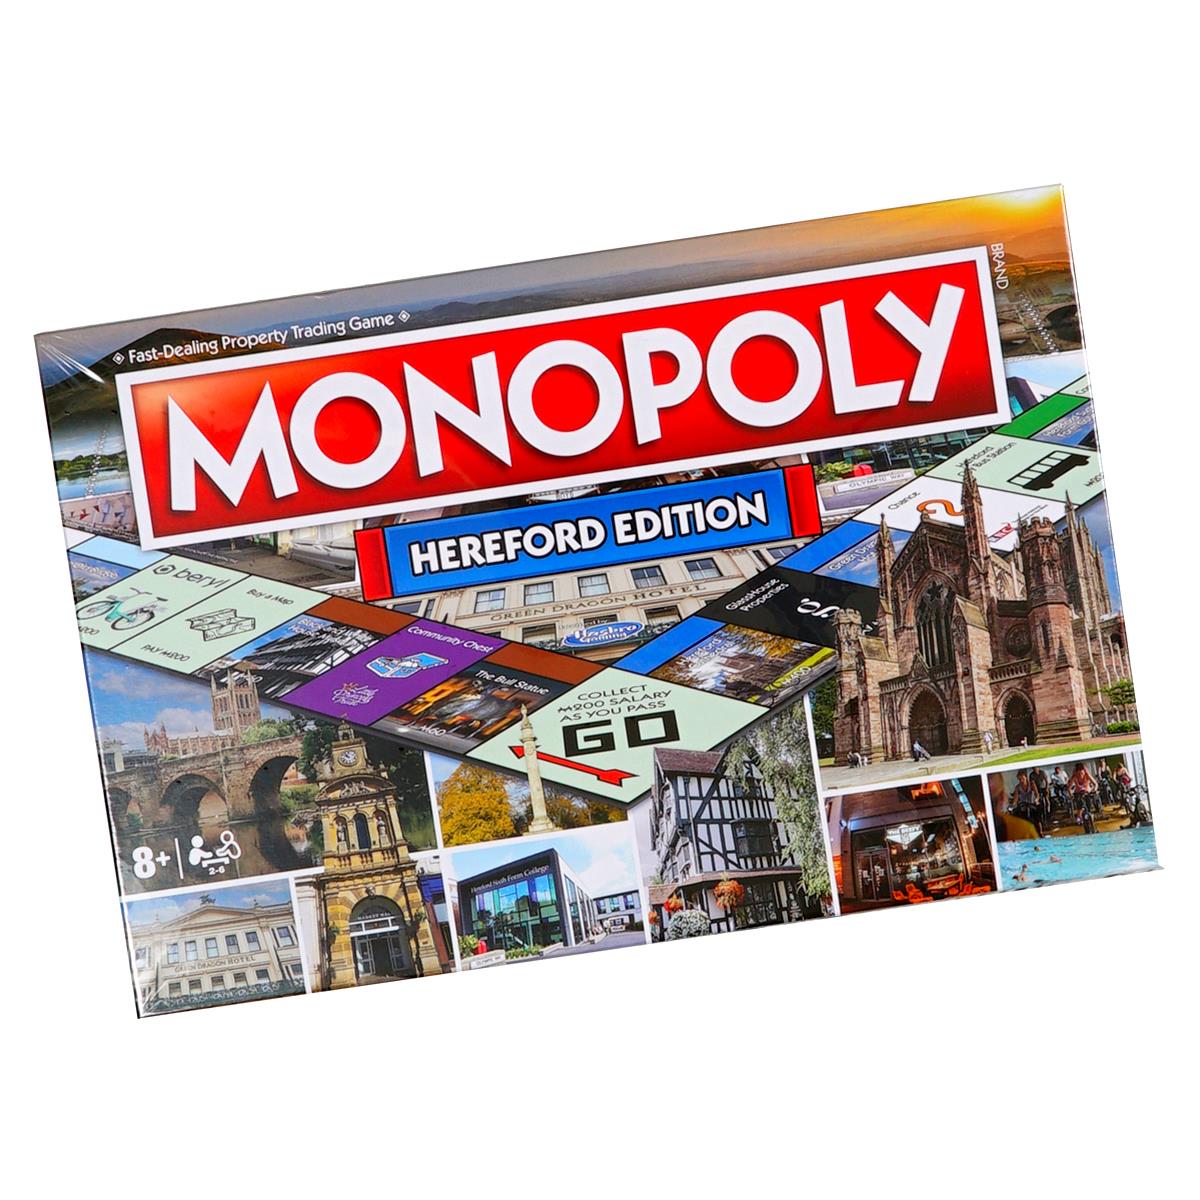 Will the Hereford Monopoly game feature local business-inspired spaces?